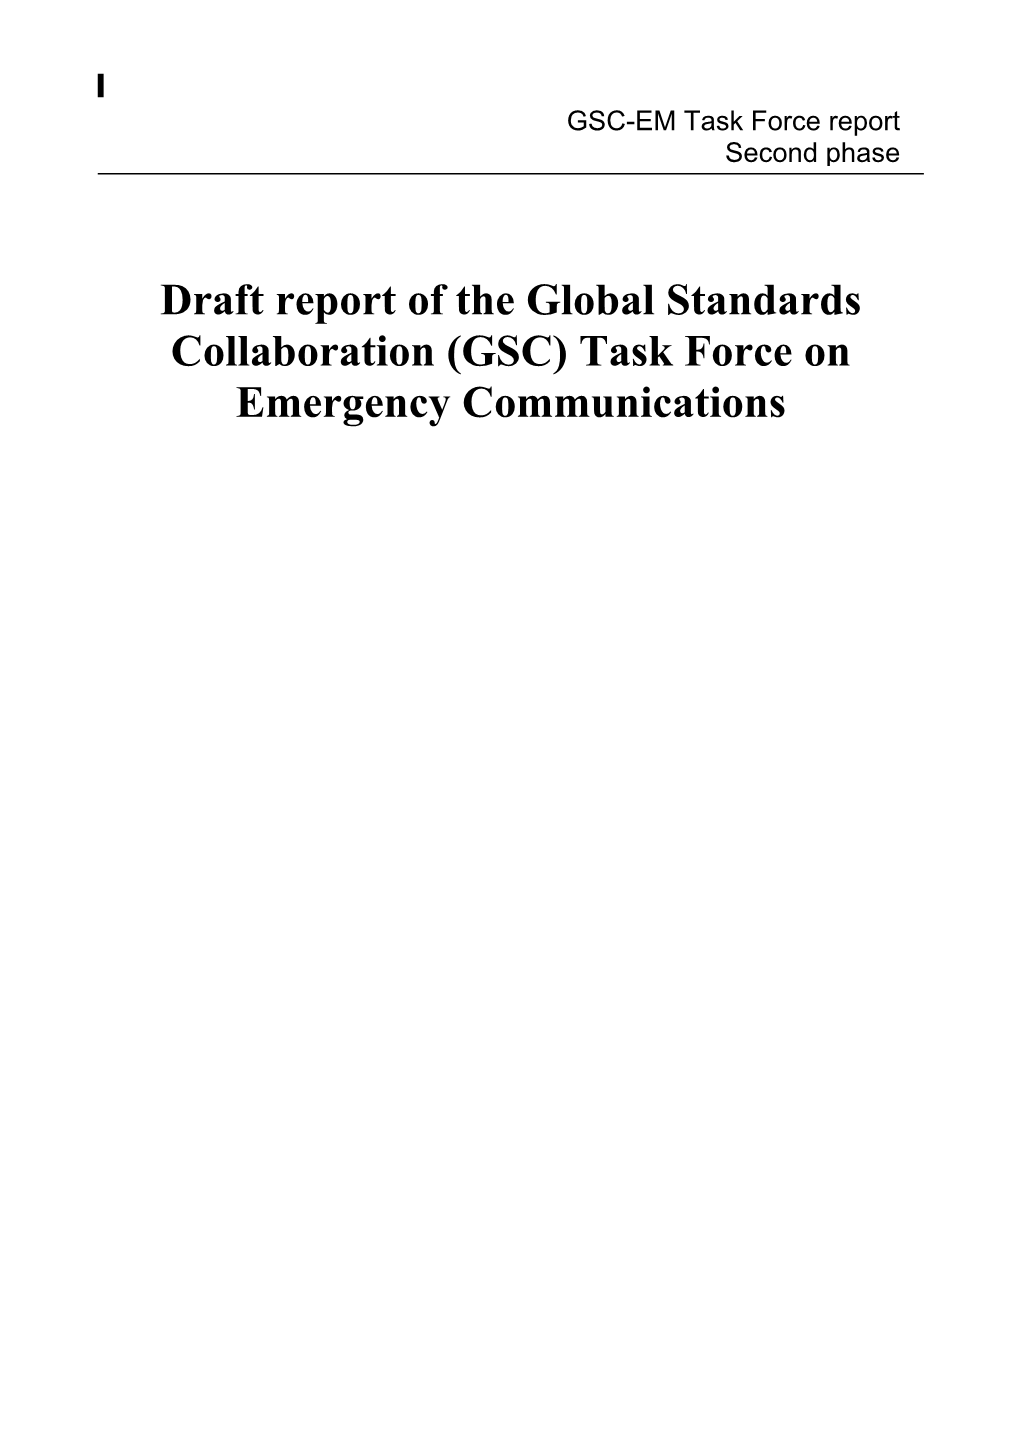 Draft Report of the Global Standards Collaboration (GSC) Task Forceon Emergency Communications